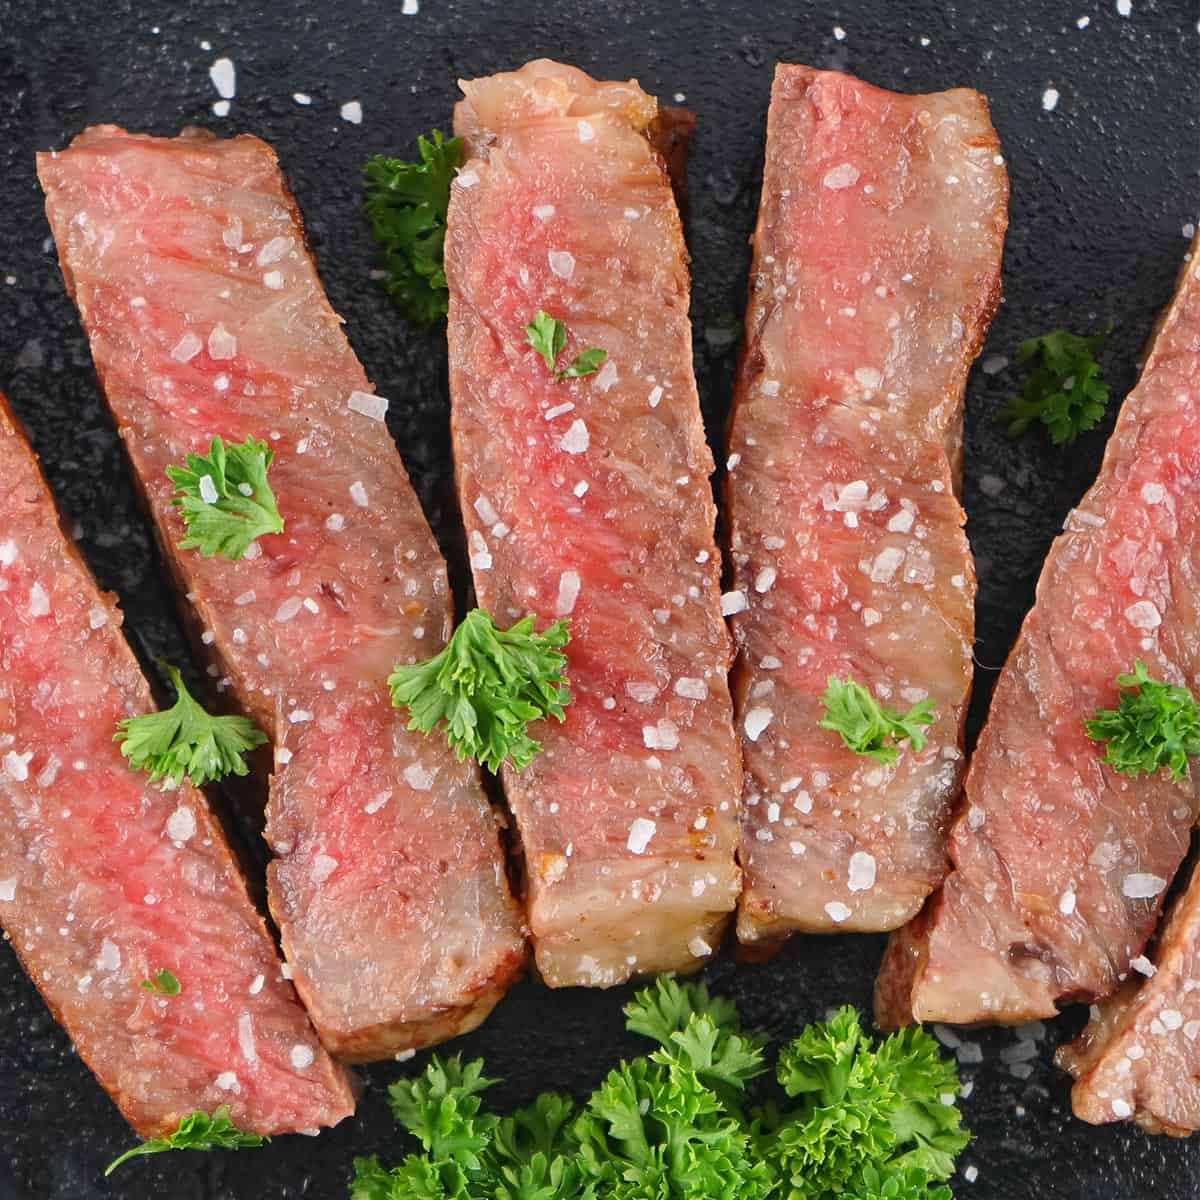 slices of gorgeous medium-rare steak on a black background with coarse salt and parsley